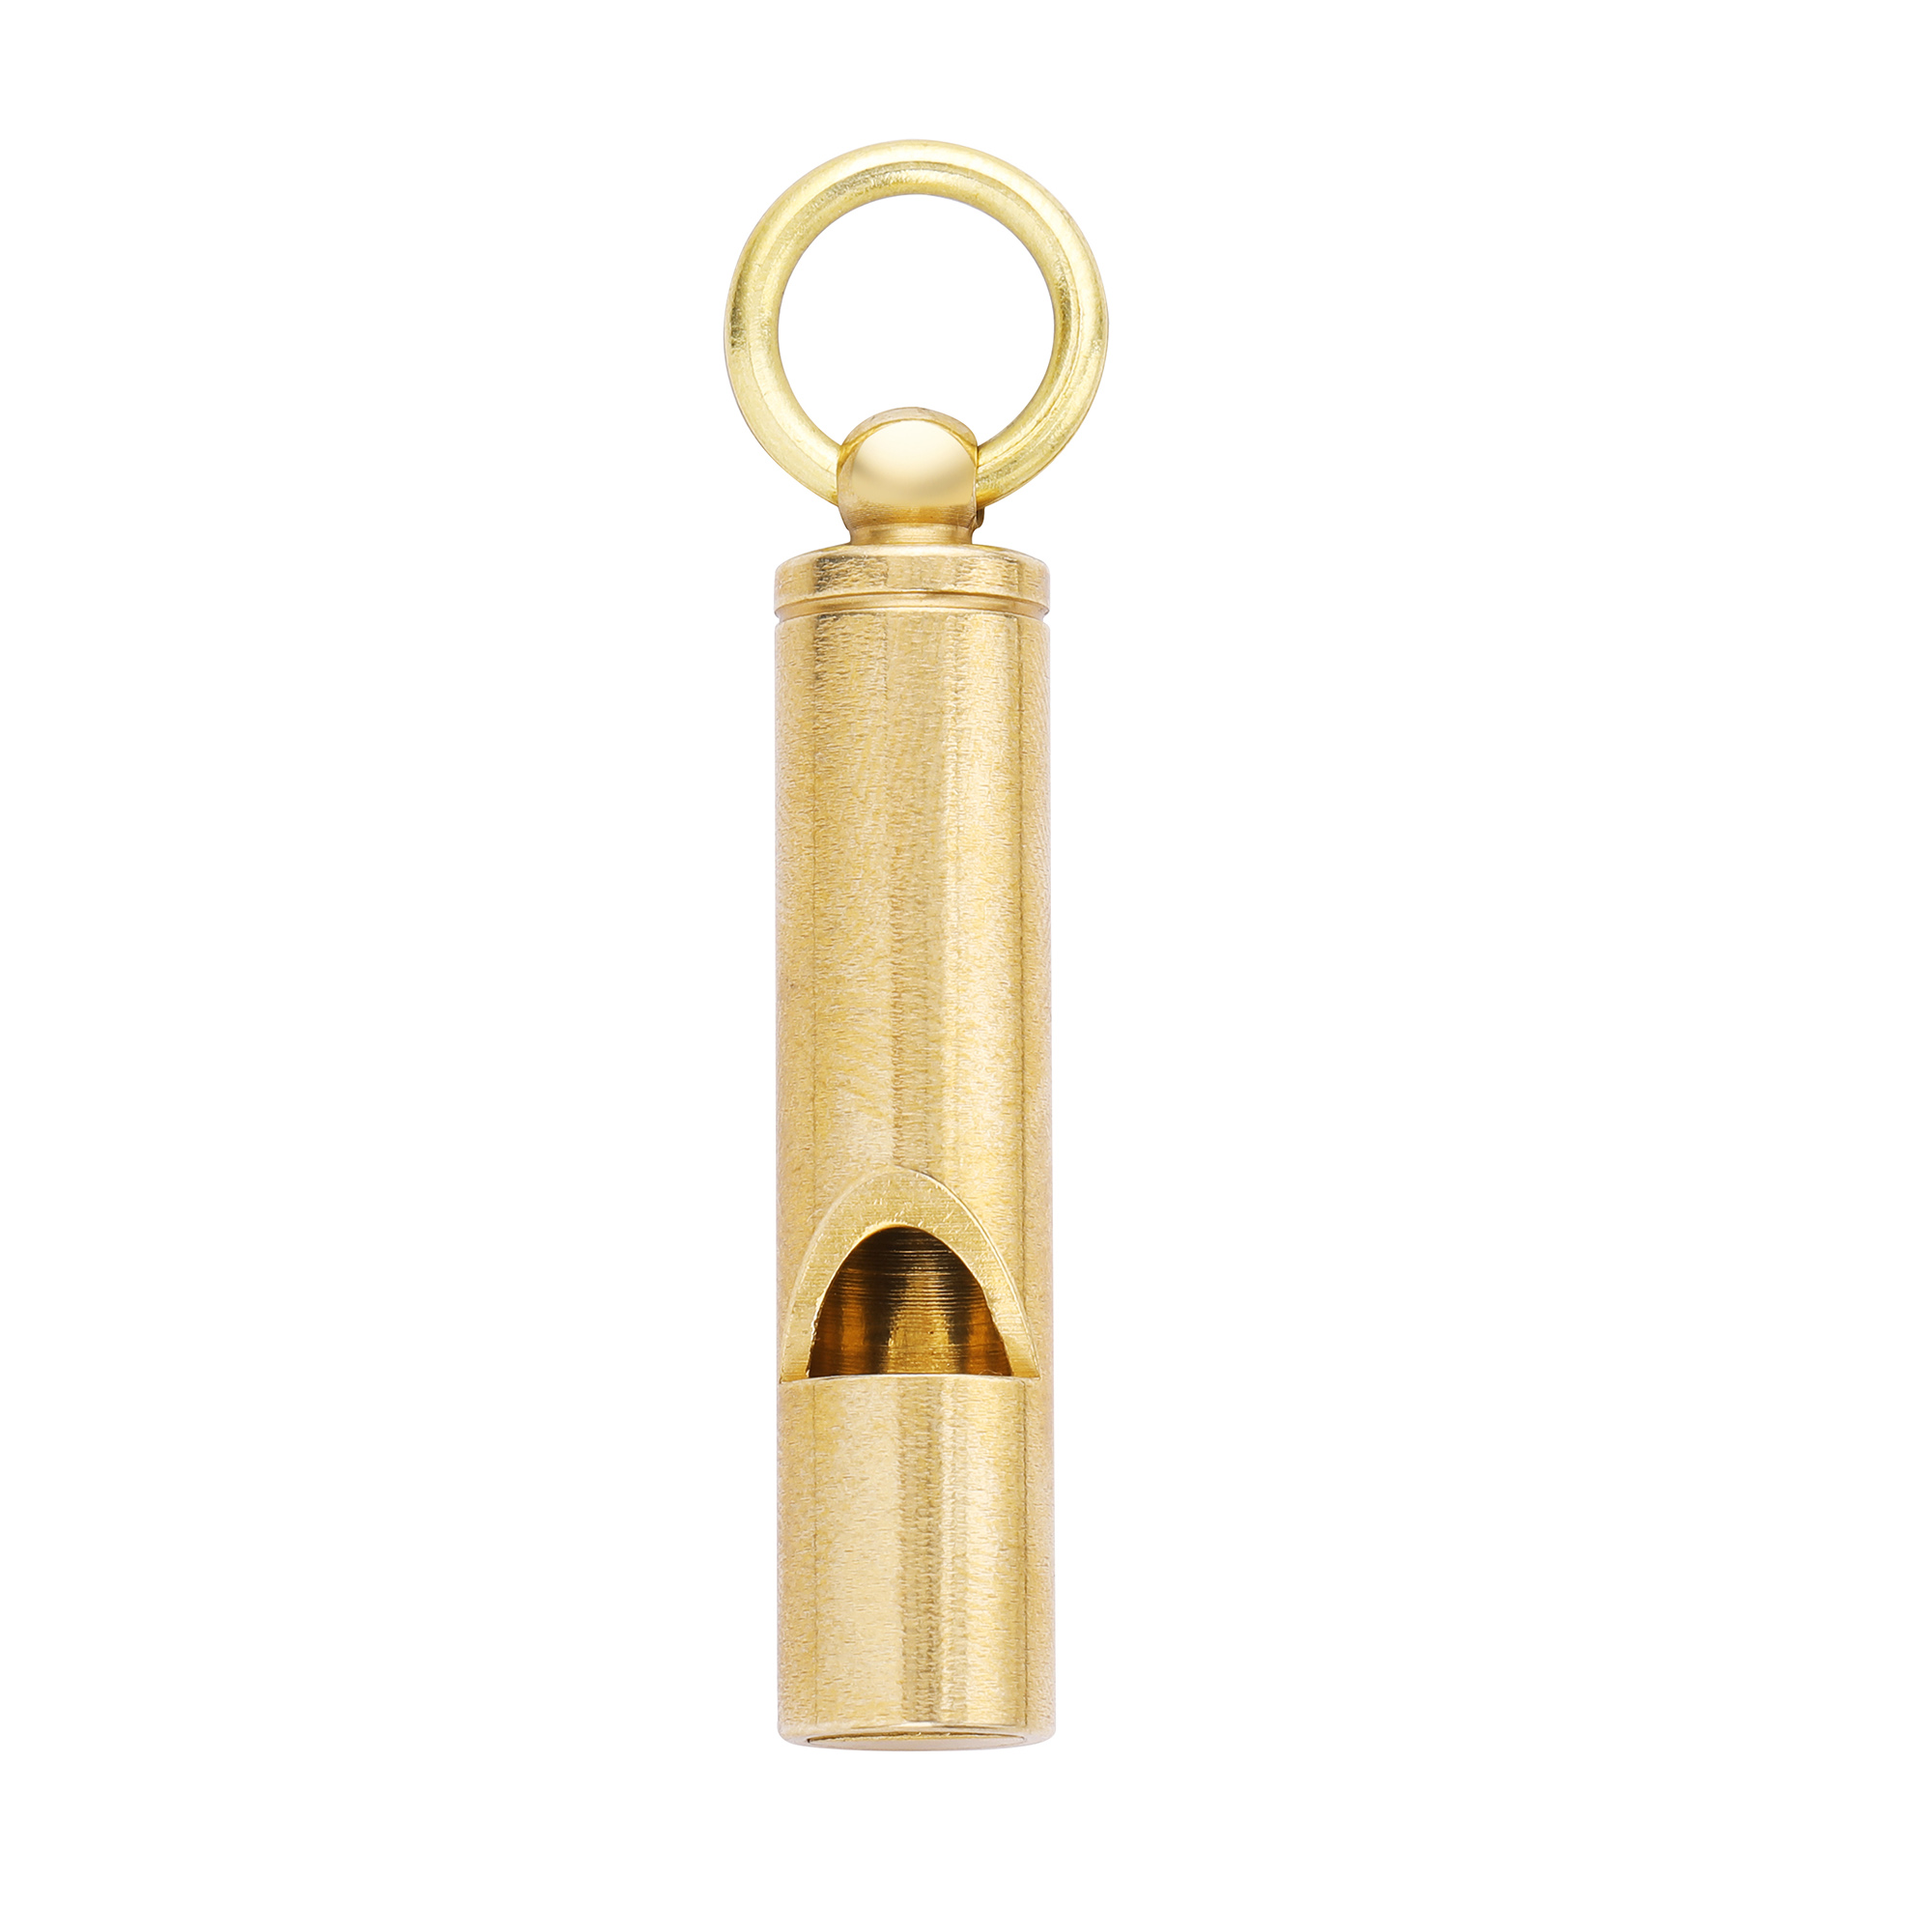 1Pcs 10x47MM Raw Brass Whistle,Brass Whistle Keychain Pendant,Emergency Whistle,Outdoor Survival Whistle 1800574 - Click Image to Close